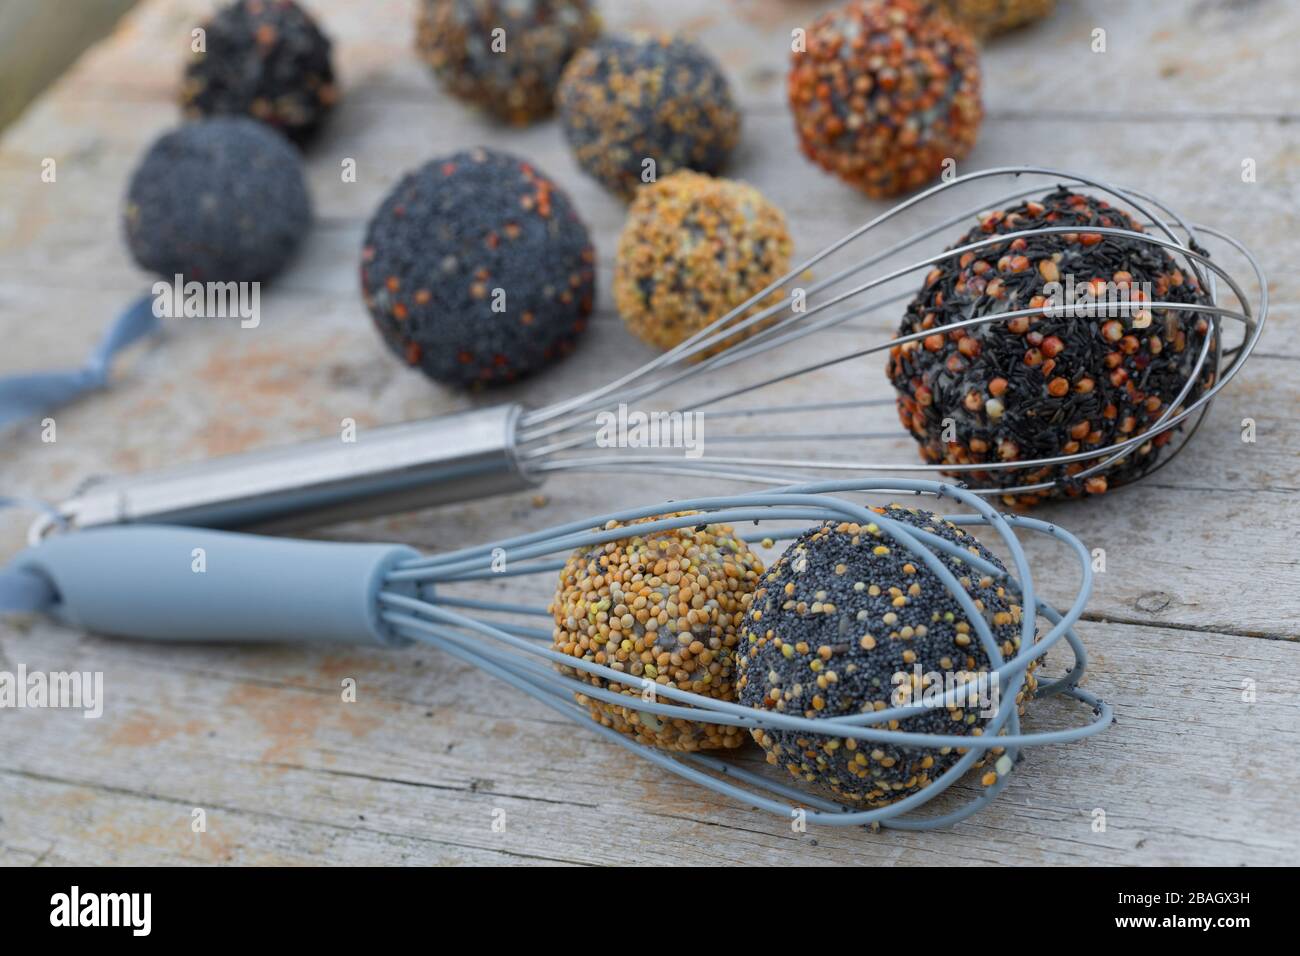 self-made bird fat balls in wire whiks, Germany Stock Photo